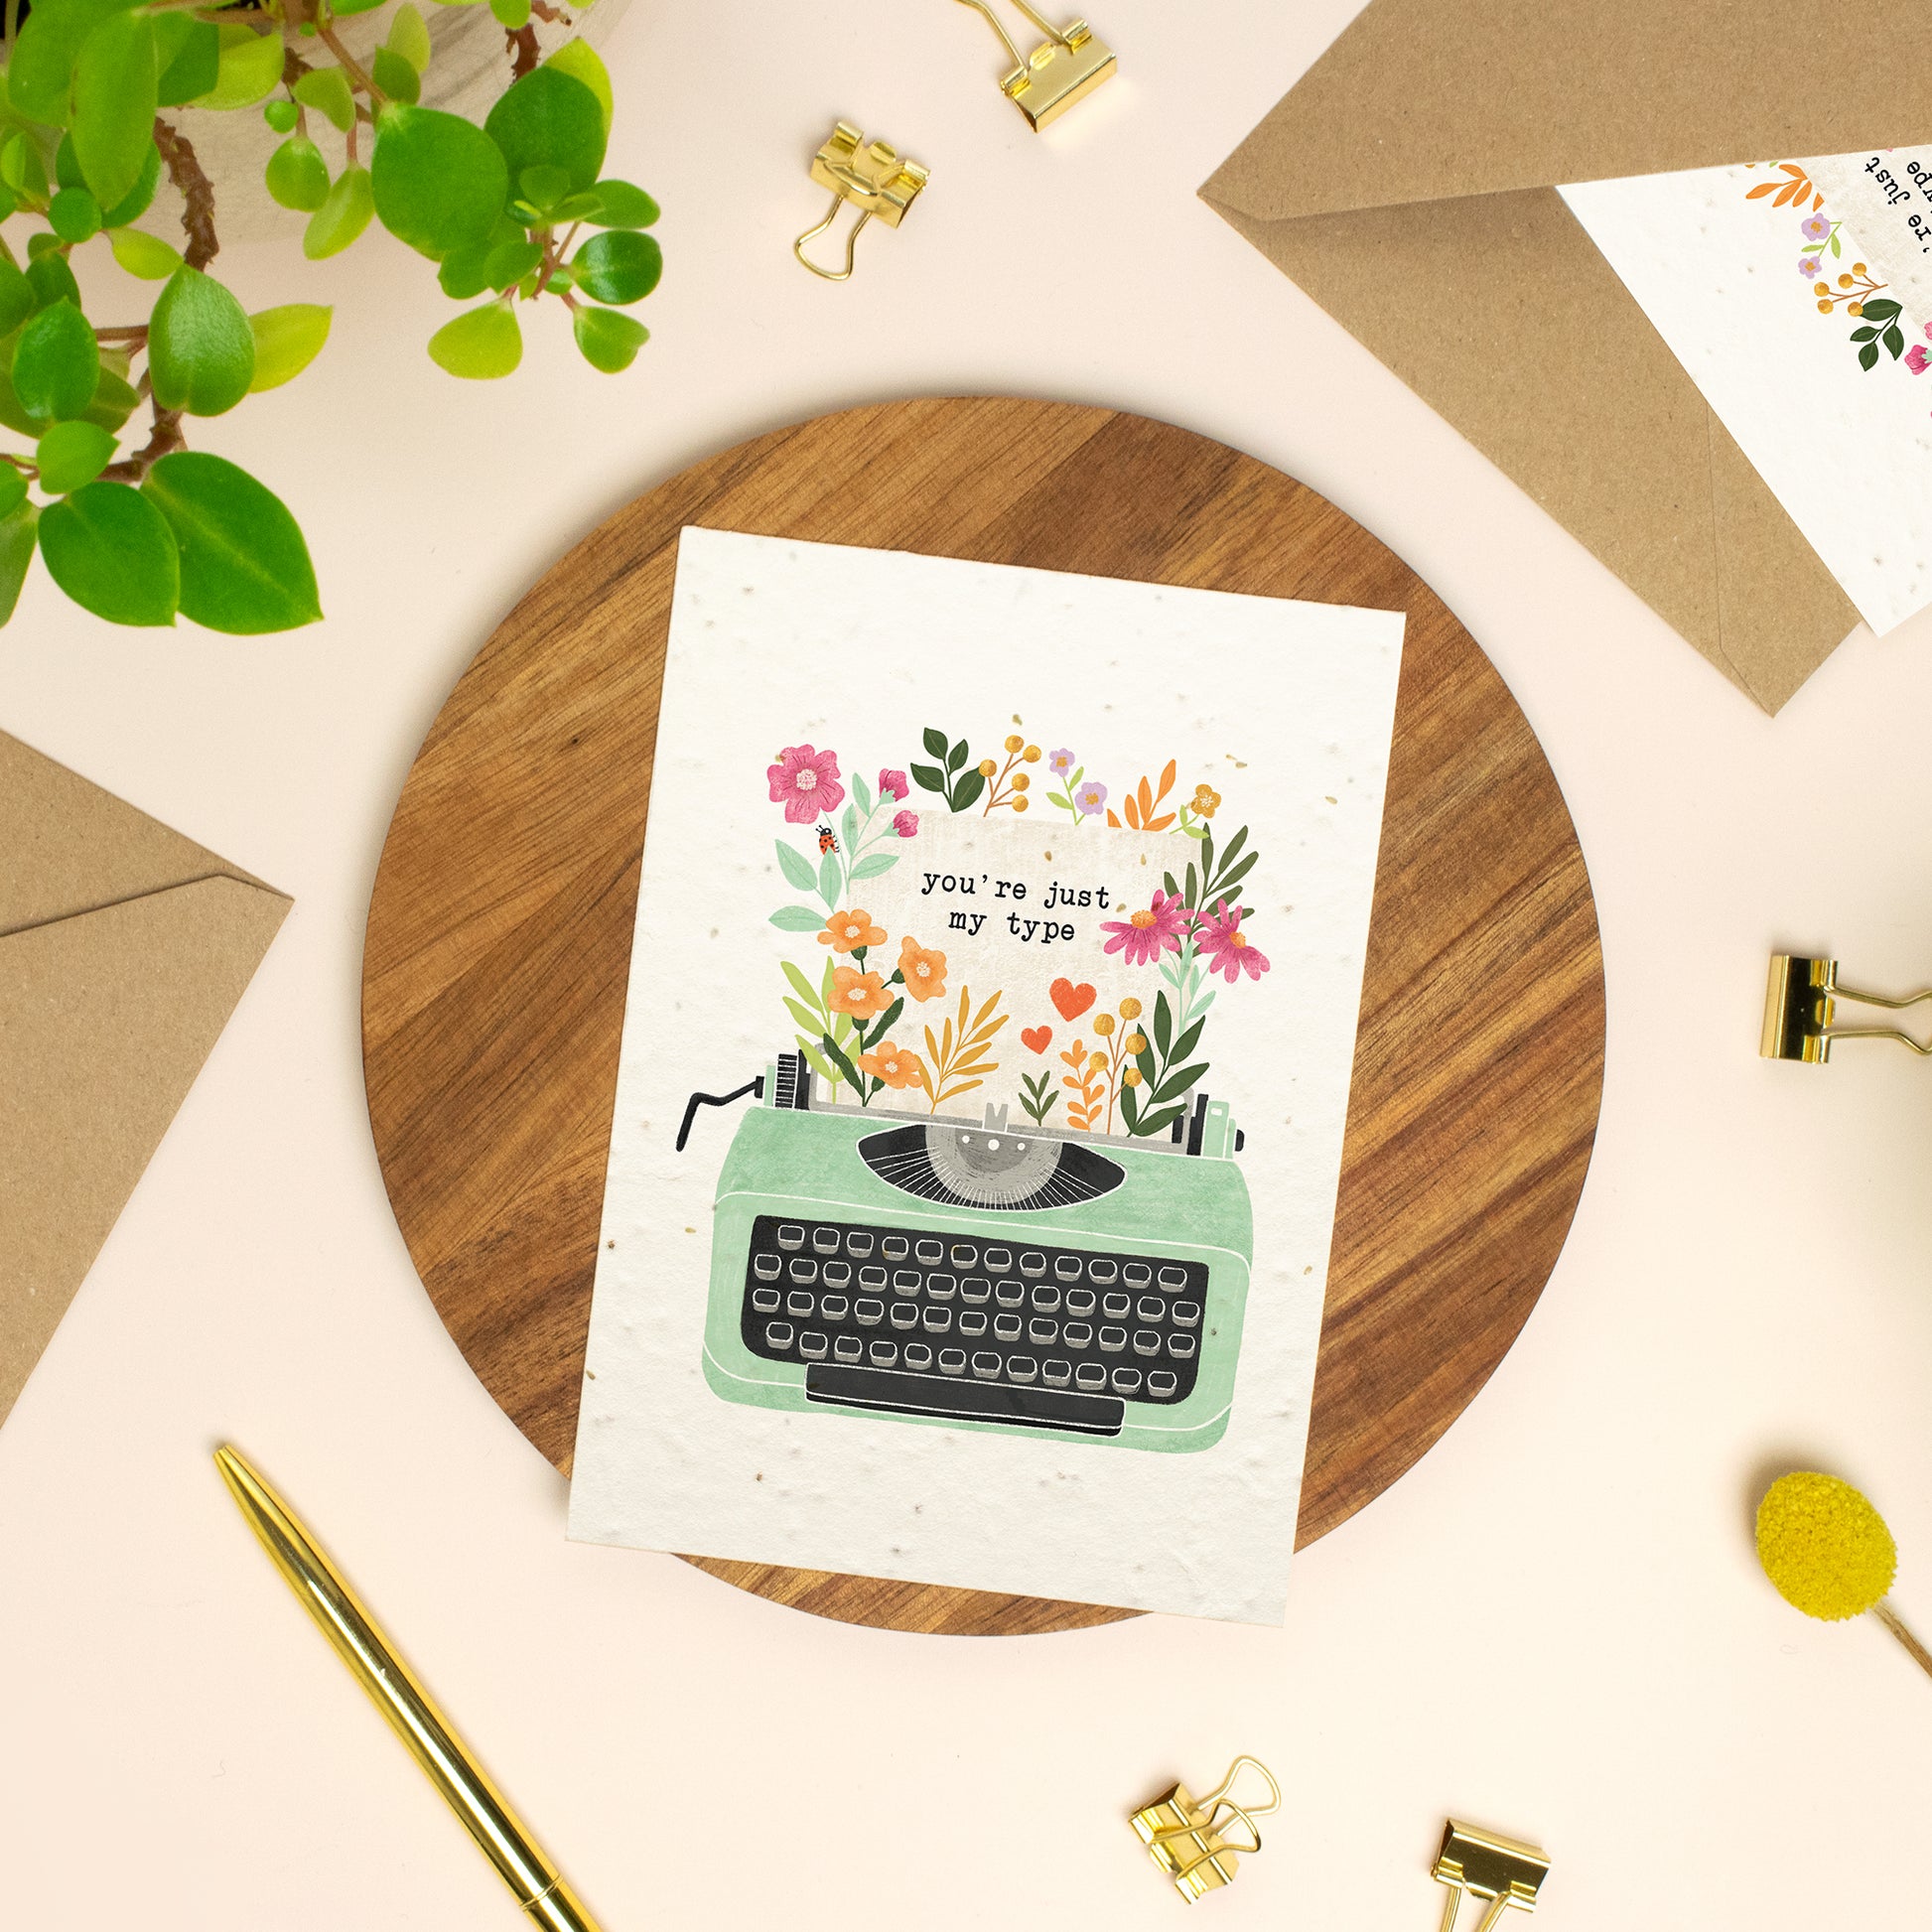 Plantable typewriter valentine's day card with wildflowers on a wooden board